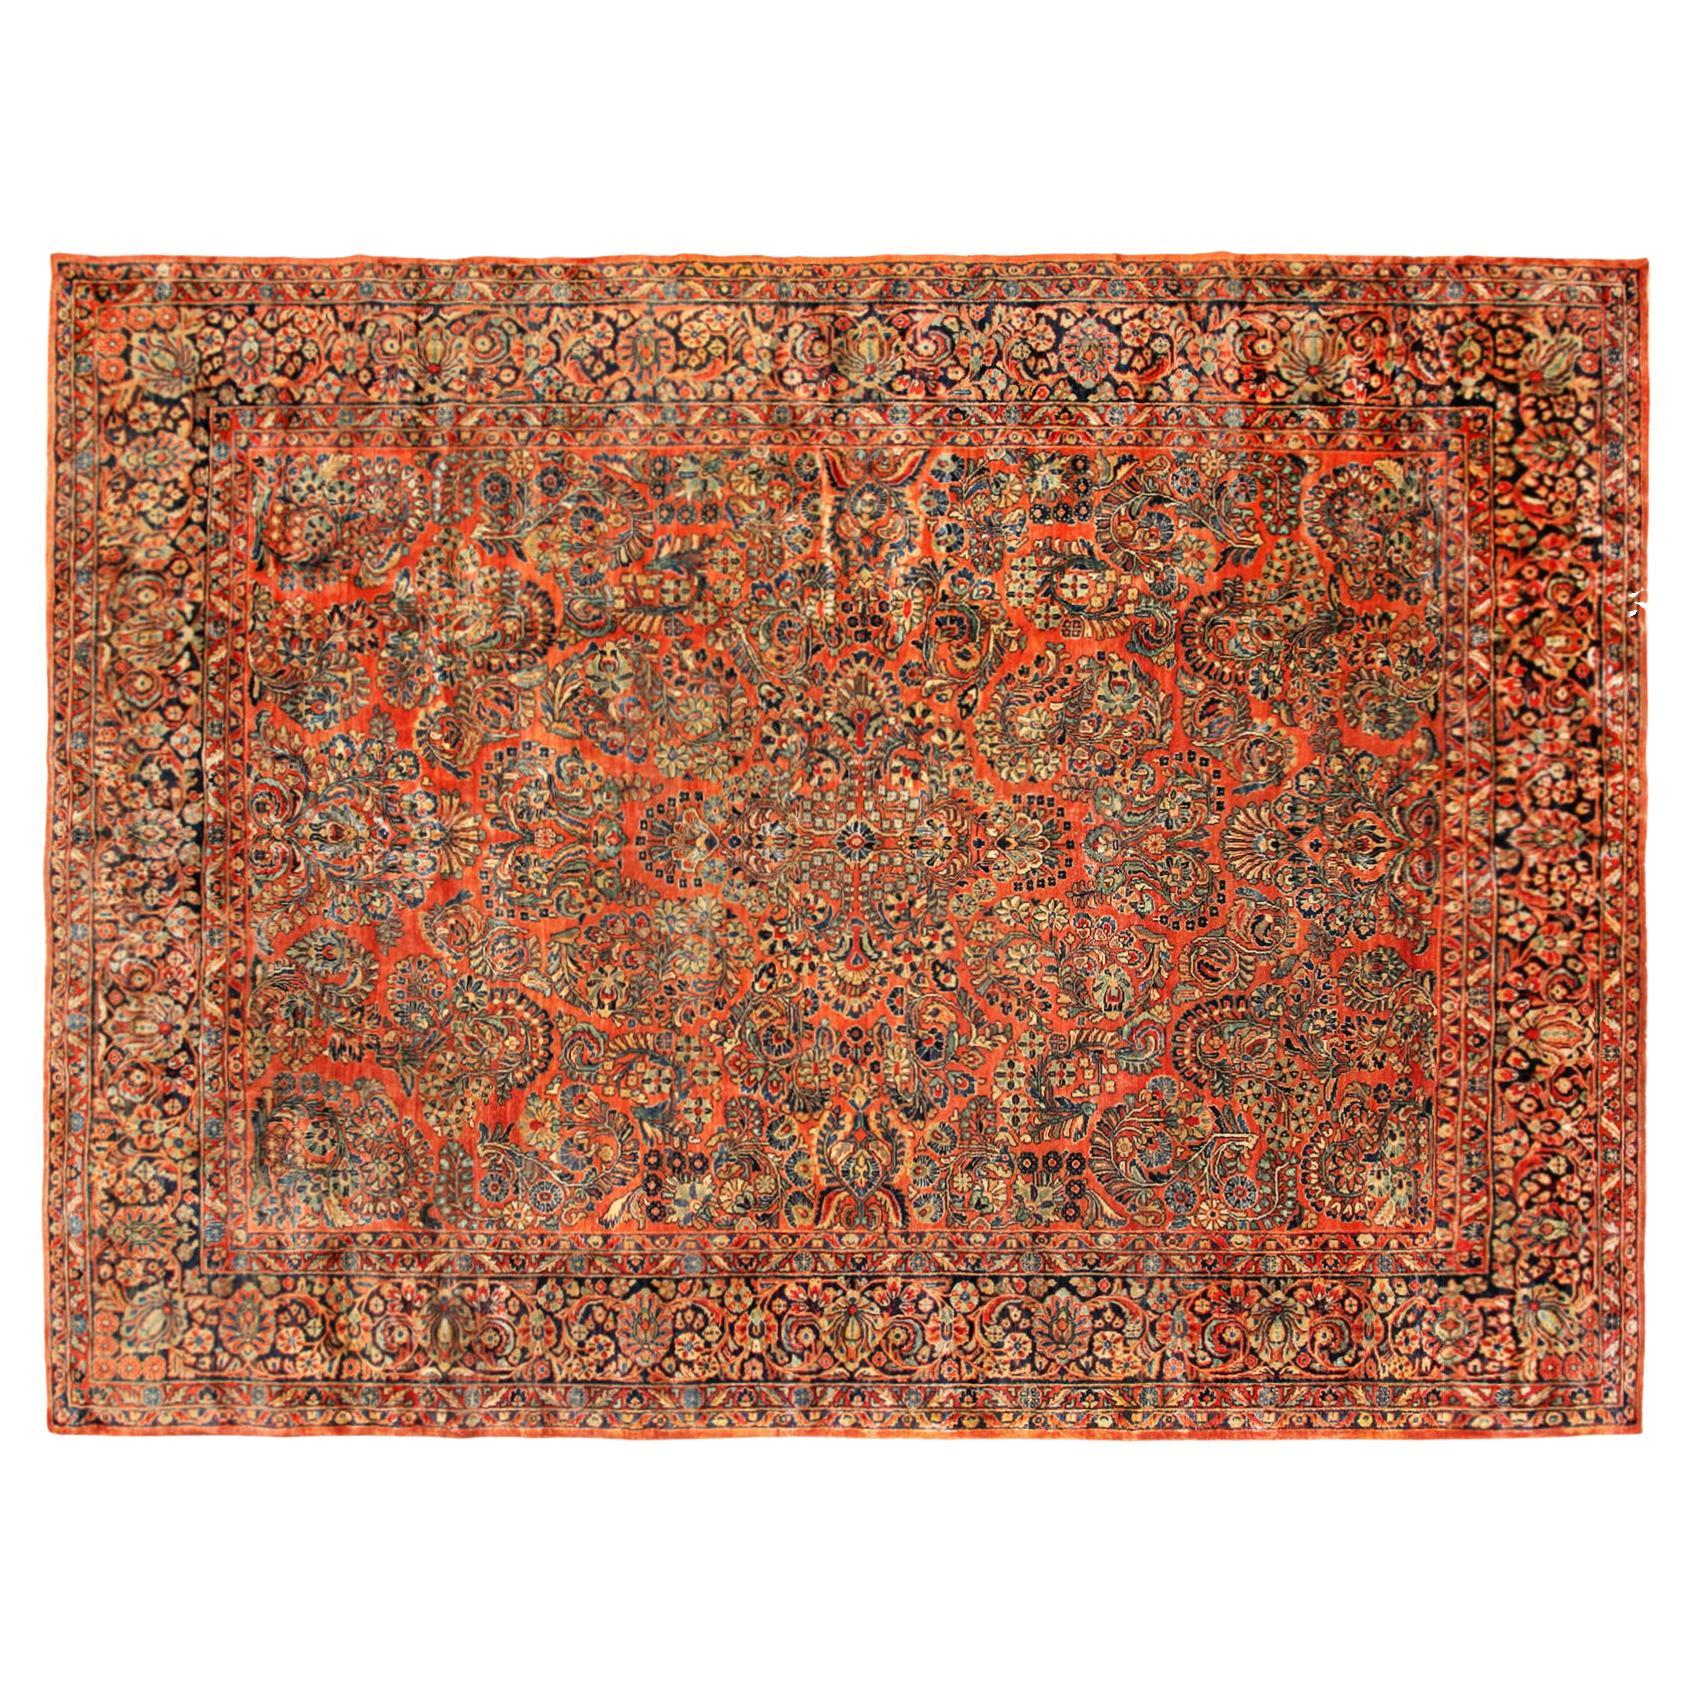 Antique Persian Sarouk Oriental Rug, in Room Size, with Coral Tones, circa 1920 For Sale